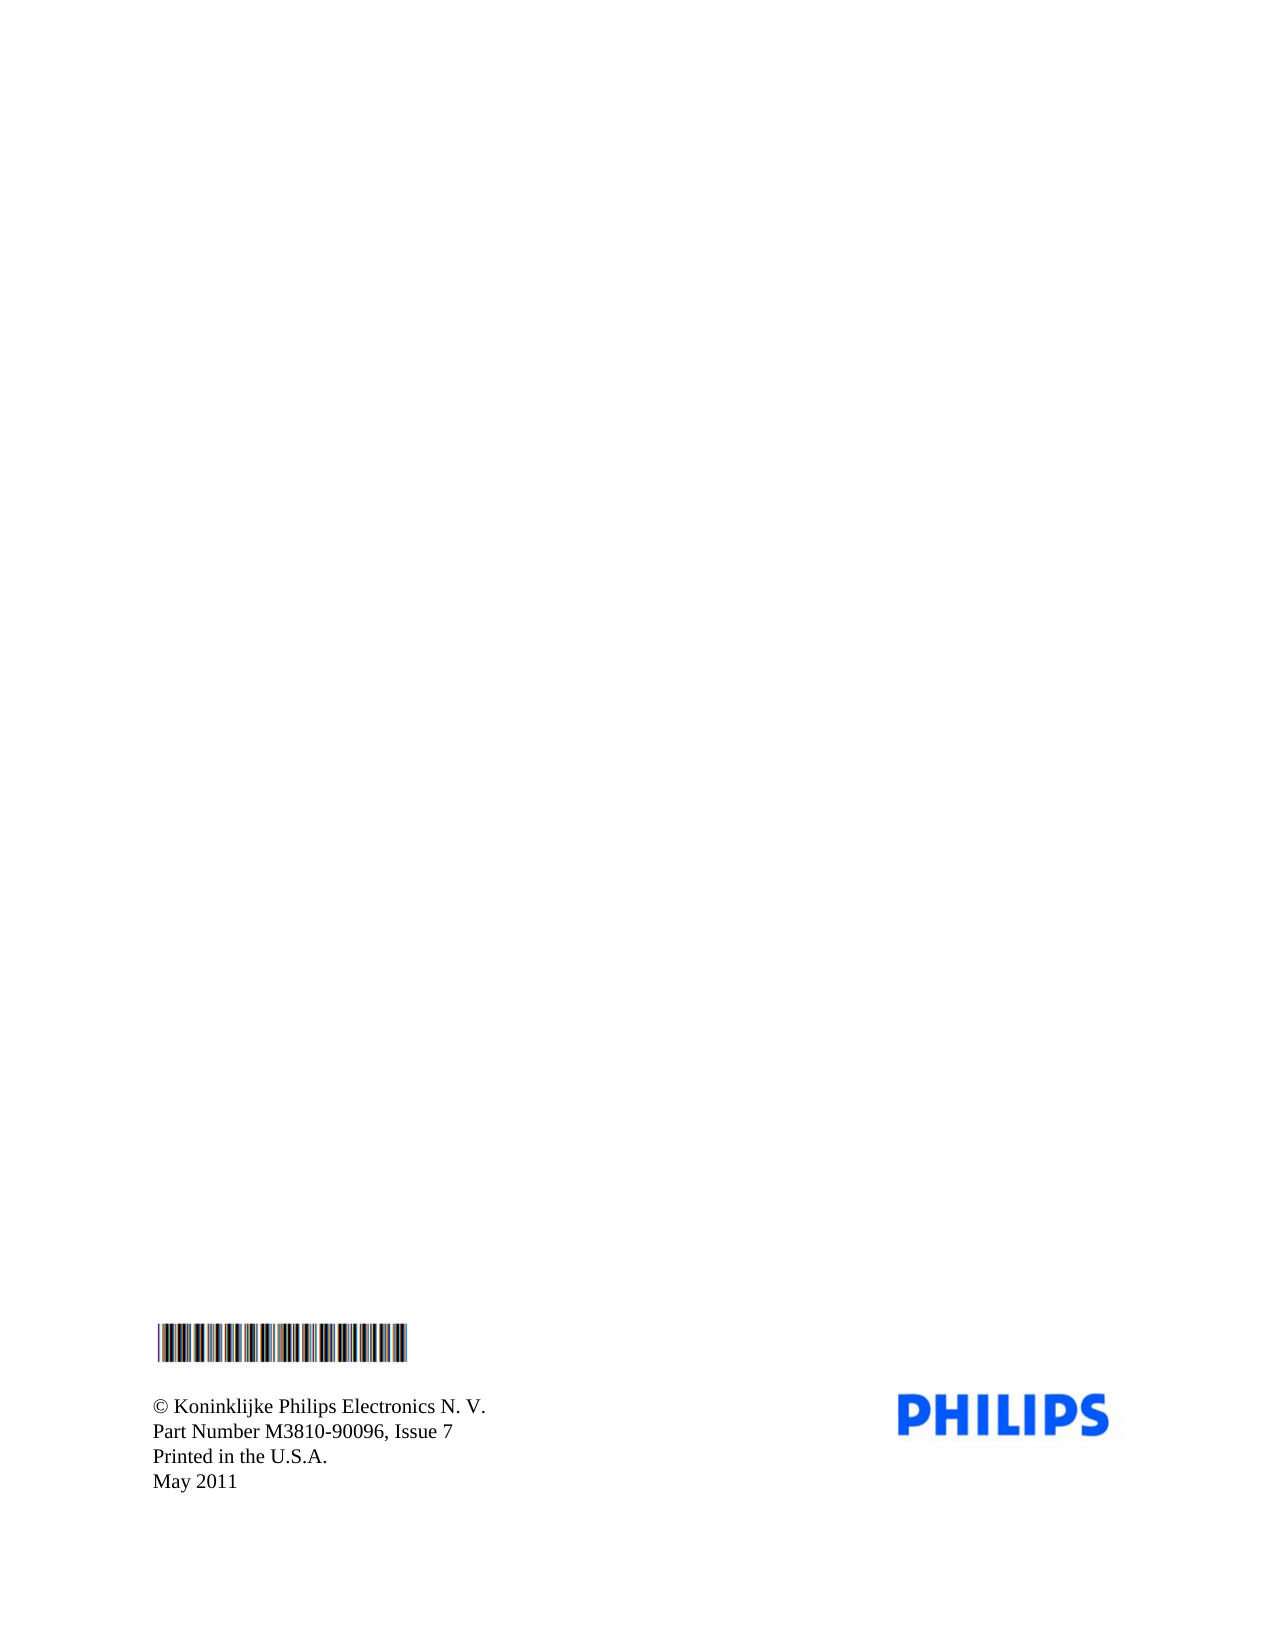 © Koninklijke Philips Electronics N. V.Part Number M3810-90096, Issue 7Printed in the U.S.A.May 2011